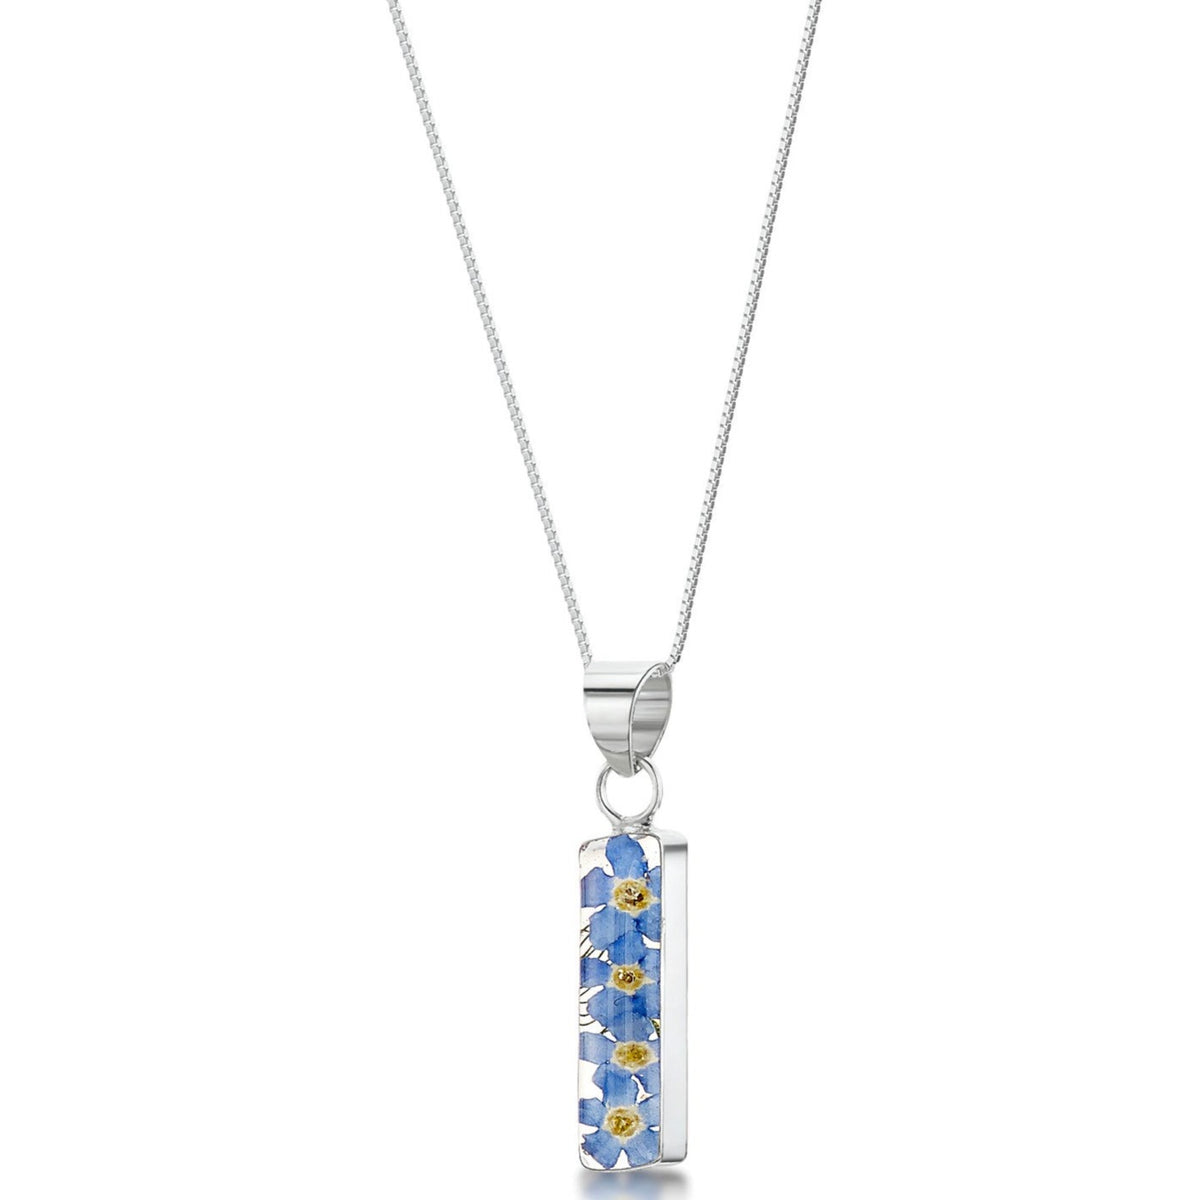 Forget-me-not silver bar necklace